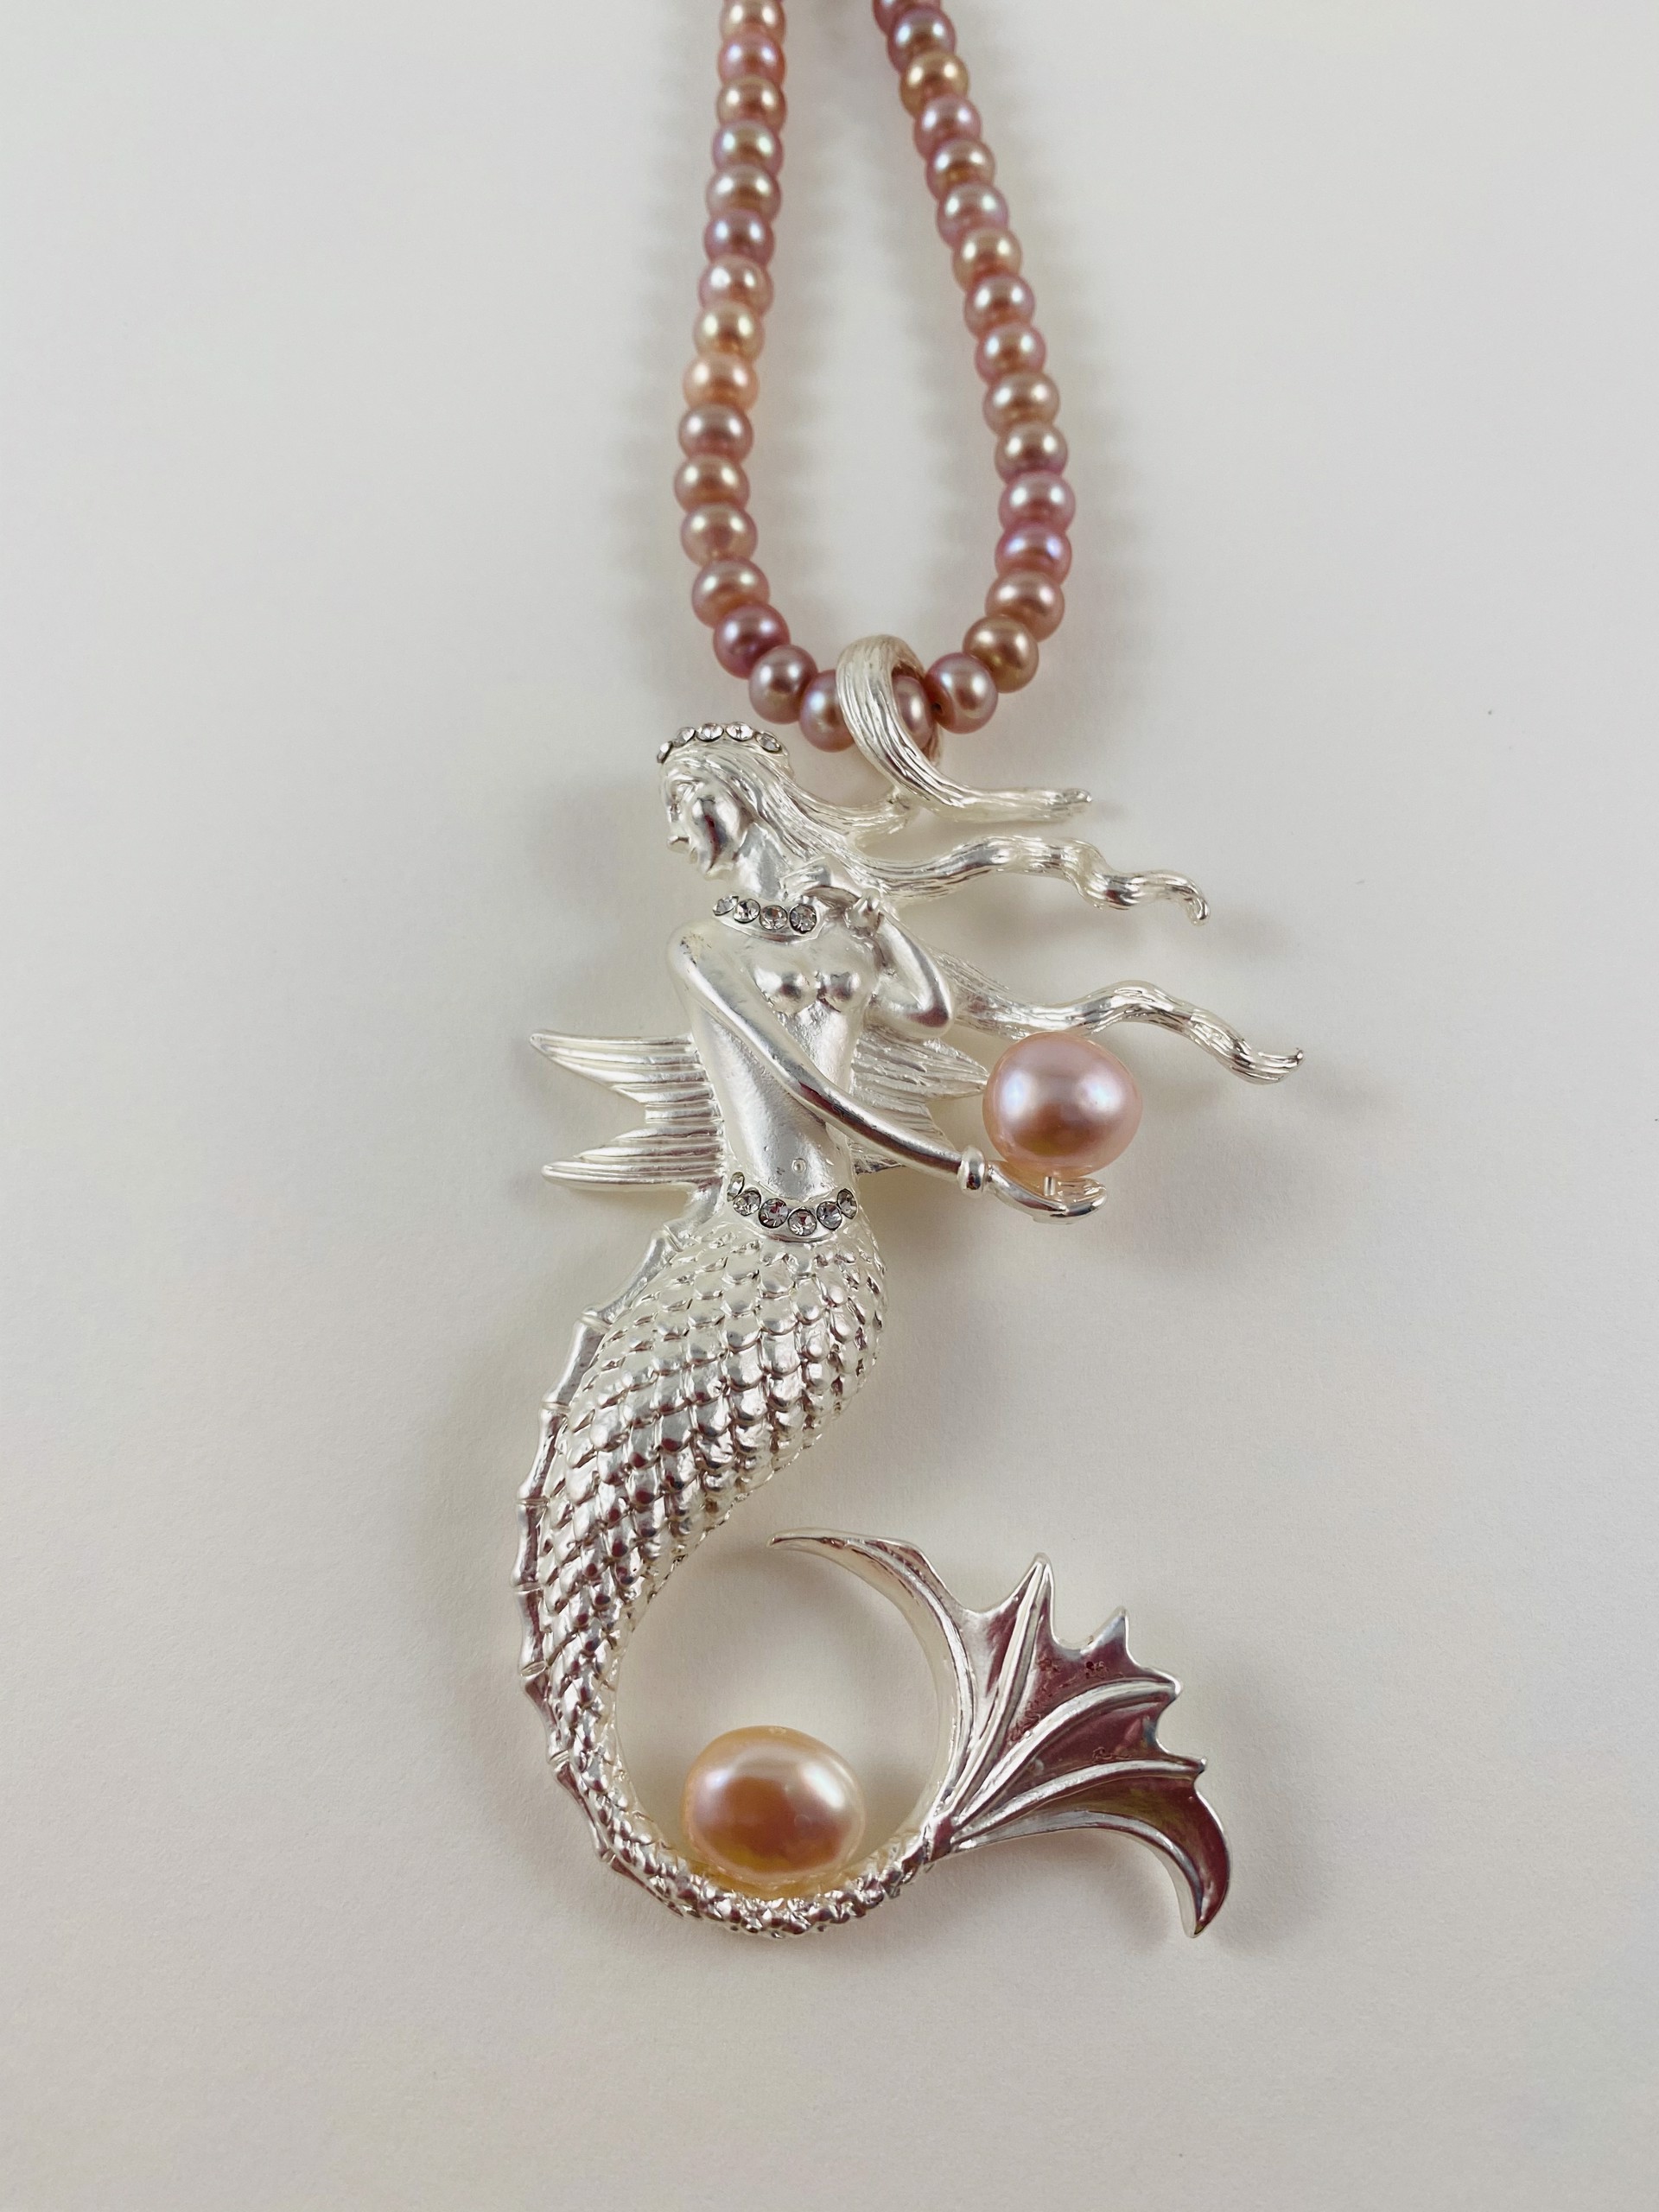  Mauve FW Pearl Necklace, designer pendant (silver plate) by Nance Trueworthy